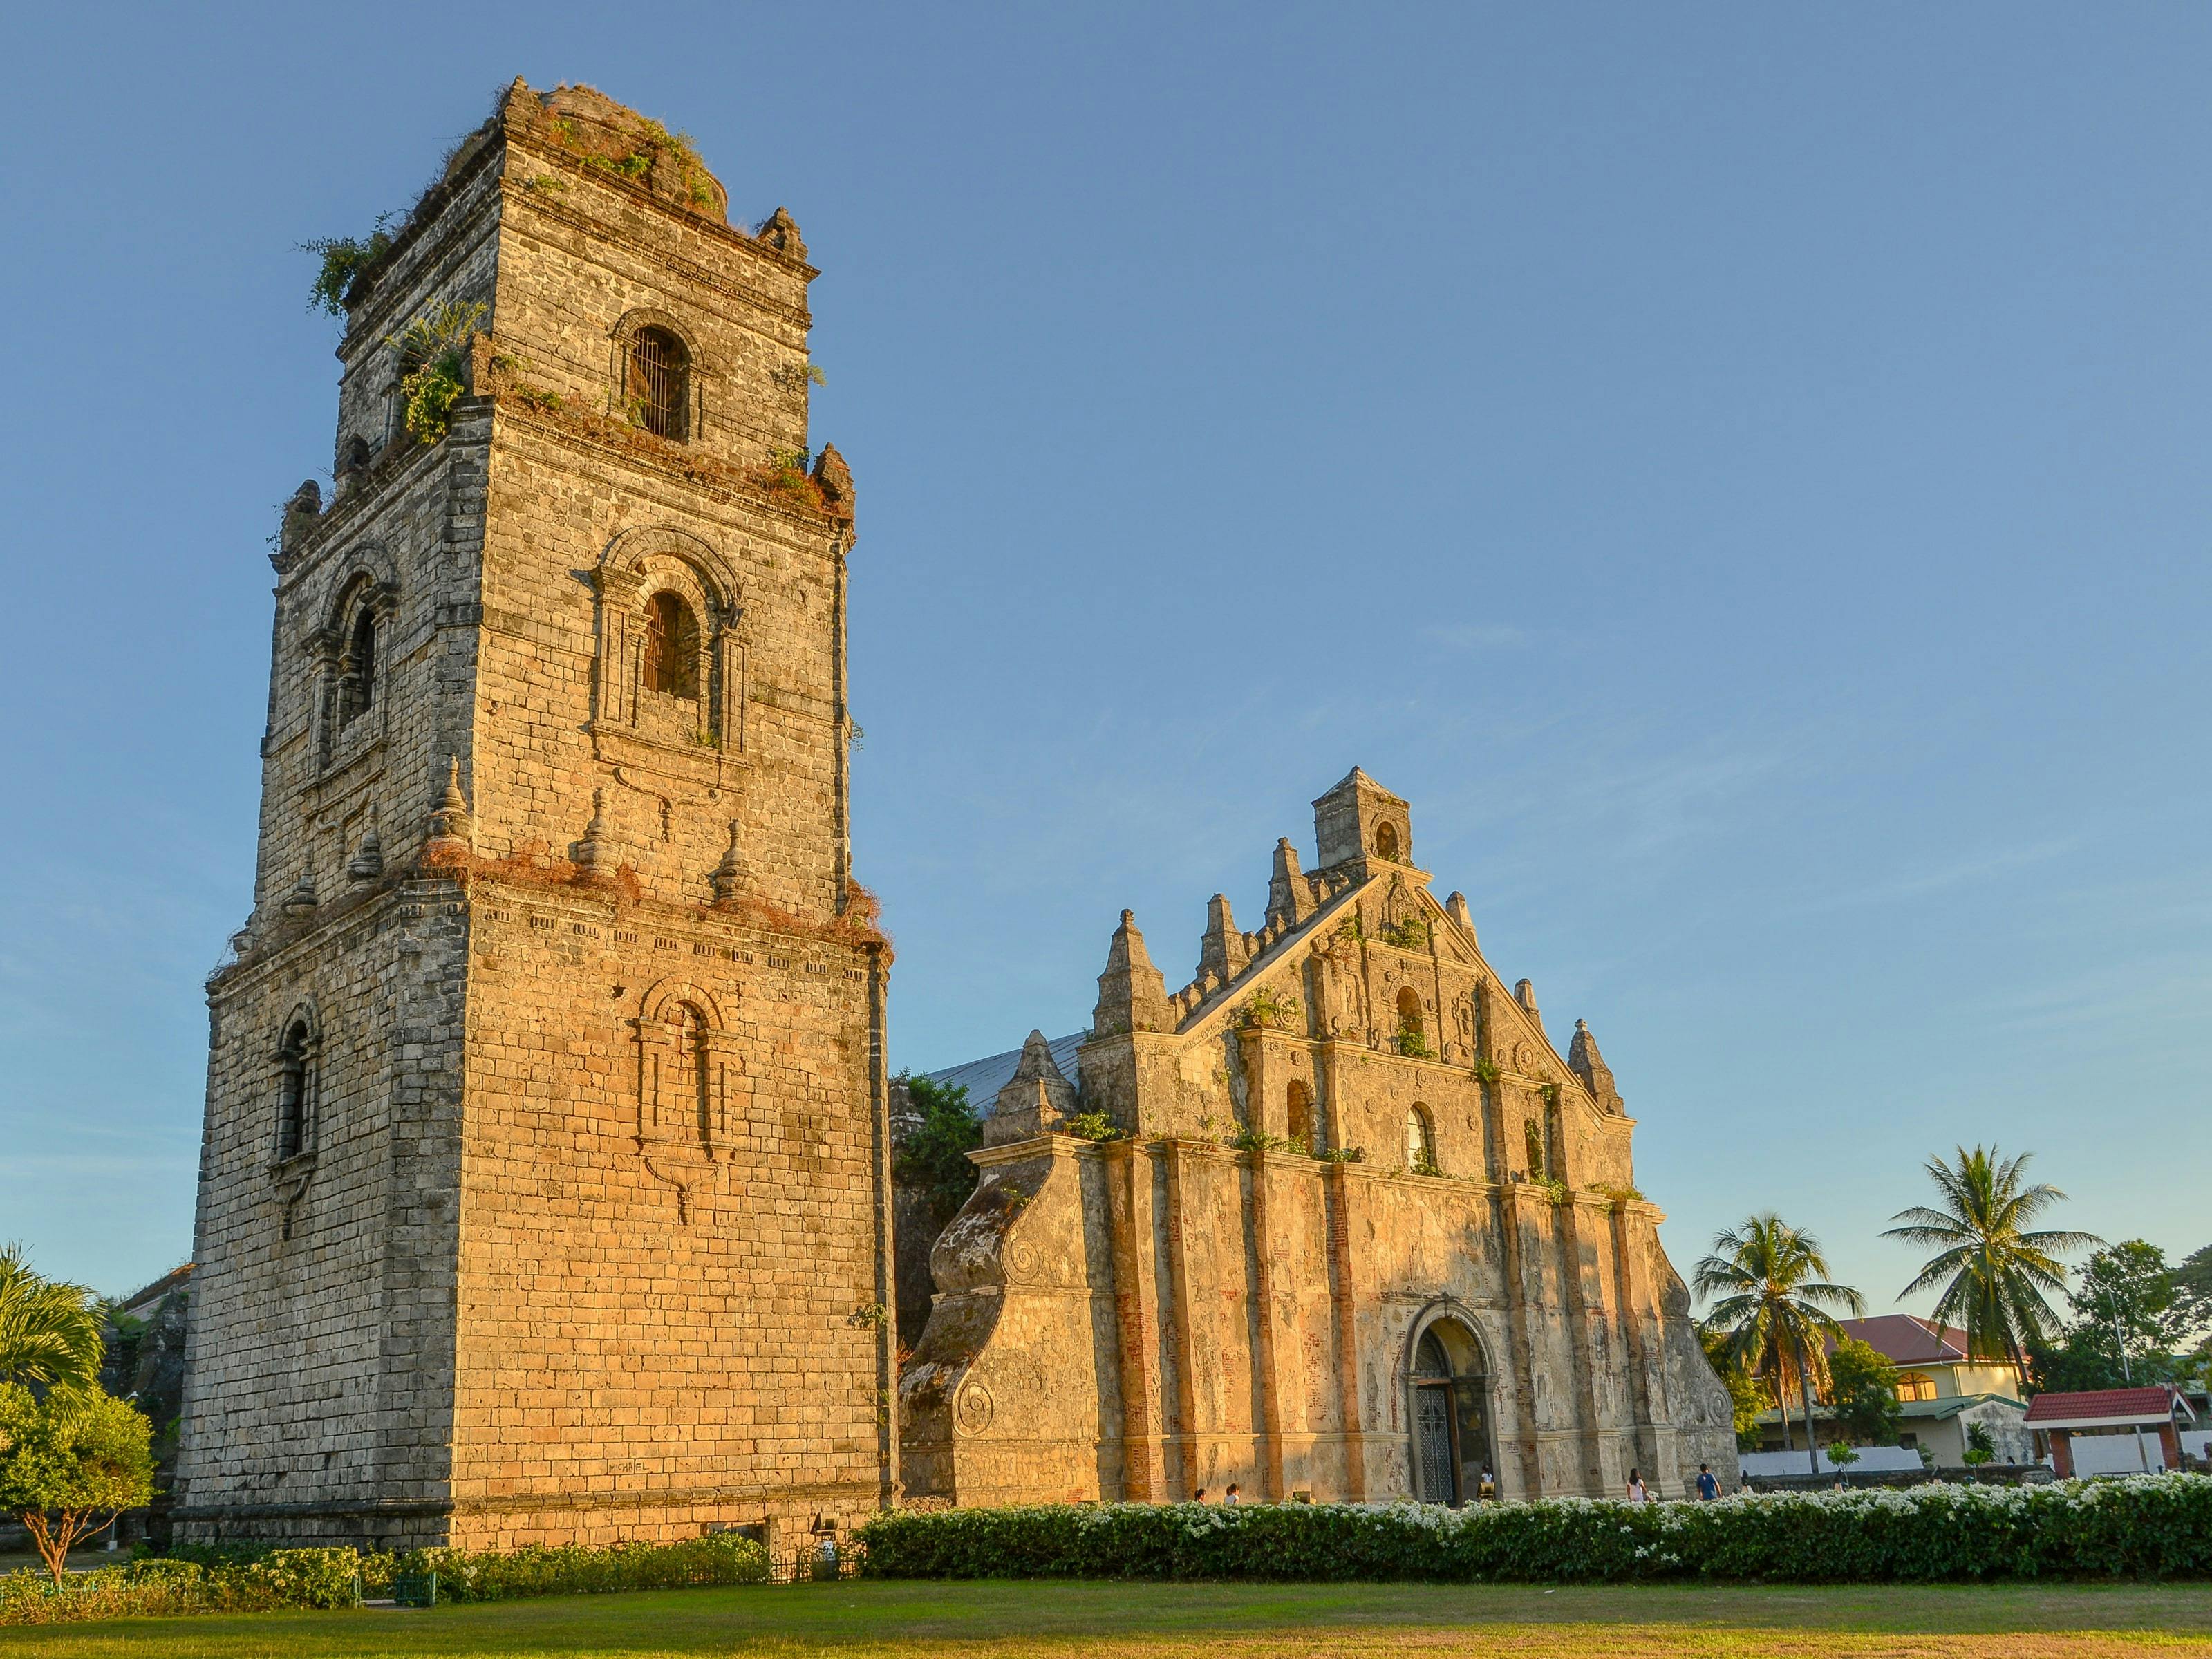 Paoay Church is one of the oldest churches in the Philippines